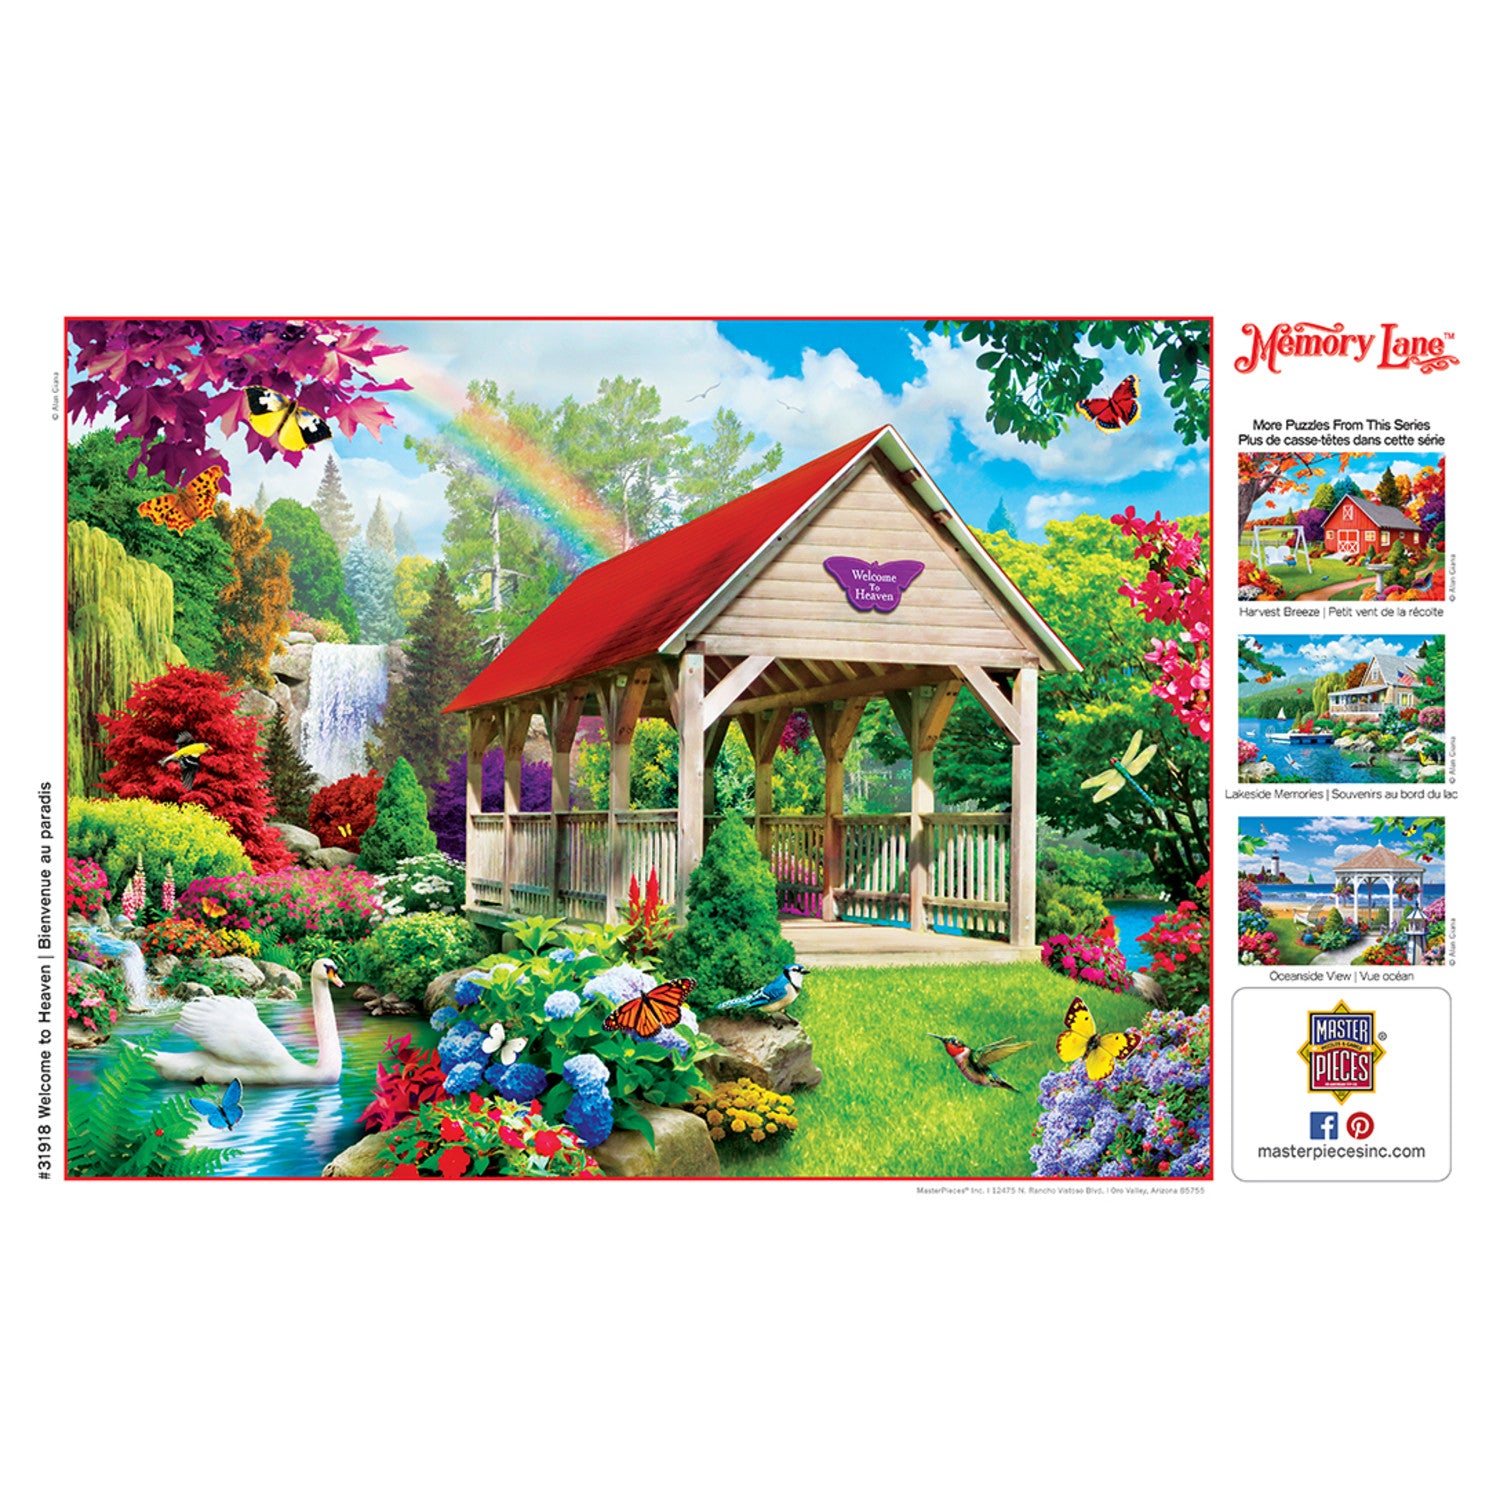 Memory Lane - Welcome to Heaven 300 Piece EZ Grip Jigsaw Puzzle